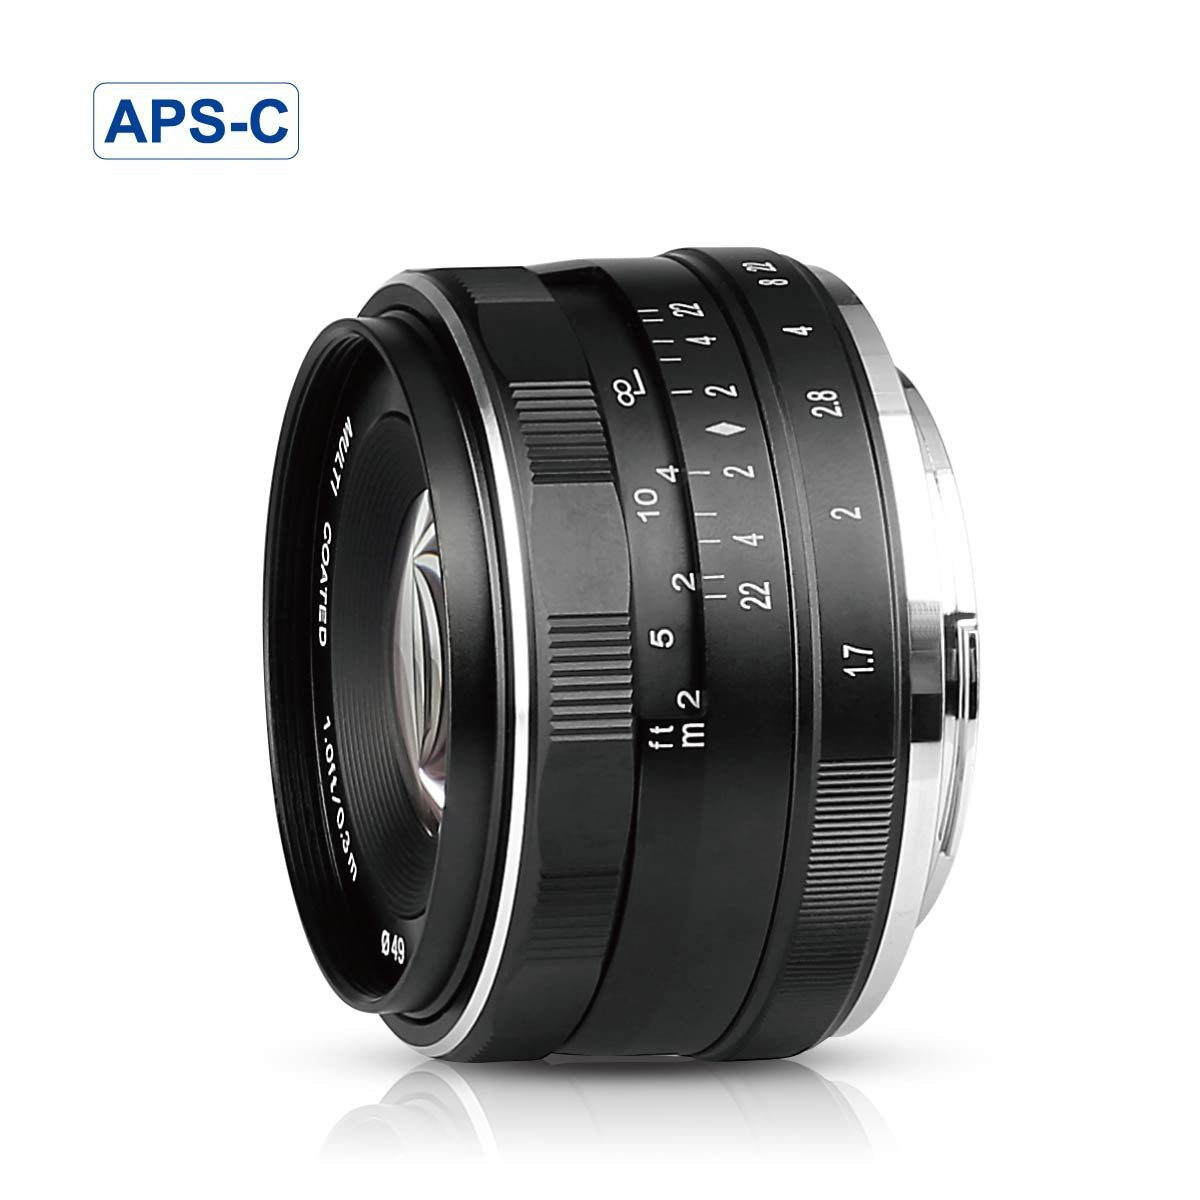 Meike MK-35mm 35mm F1.7 Large Aperture Manual Prime Fixed Lens APS-C for Sony E-Mount Digital Mirrorless Cameras NEX 3 NEX 3N NEX 5 NEX 5T NEX 5R NEX 6 7 A5000, A5100, A6000, A6100,A6300 A6500 A9